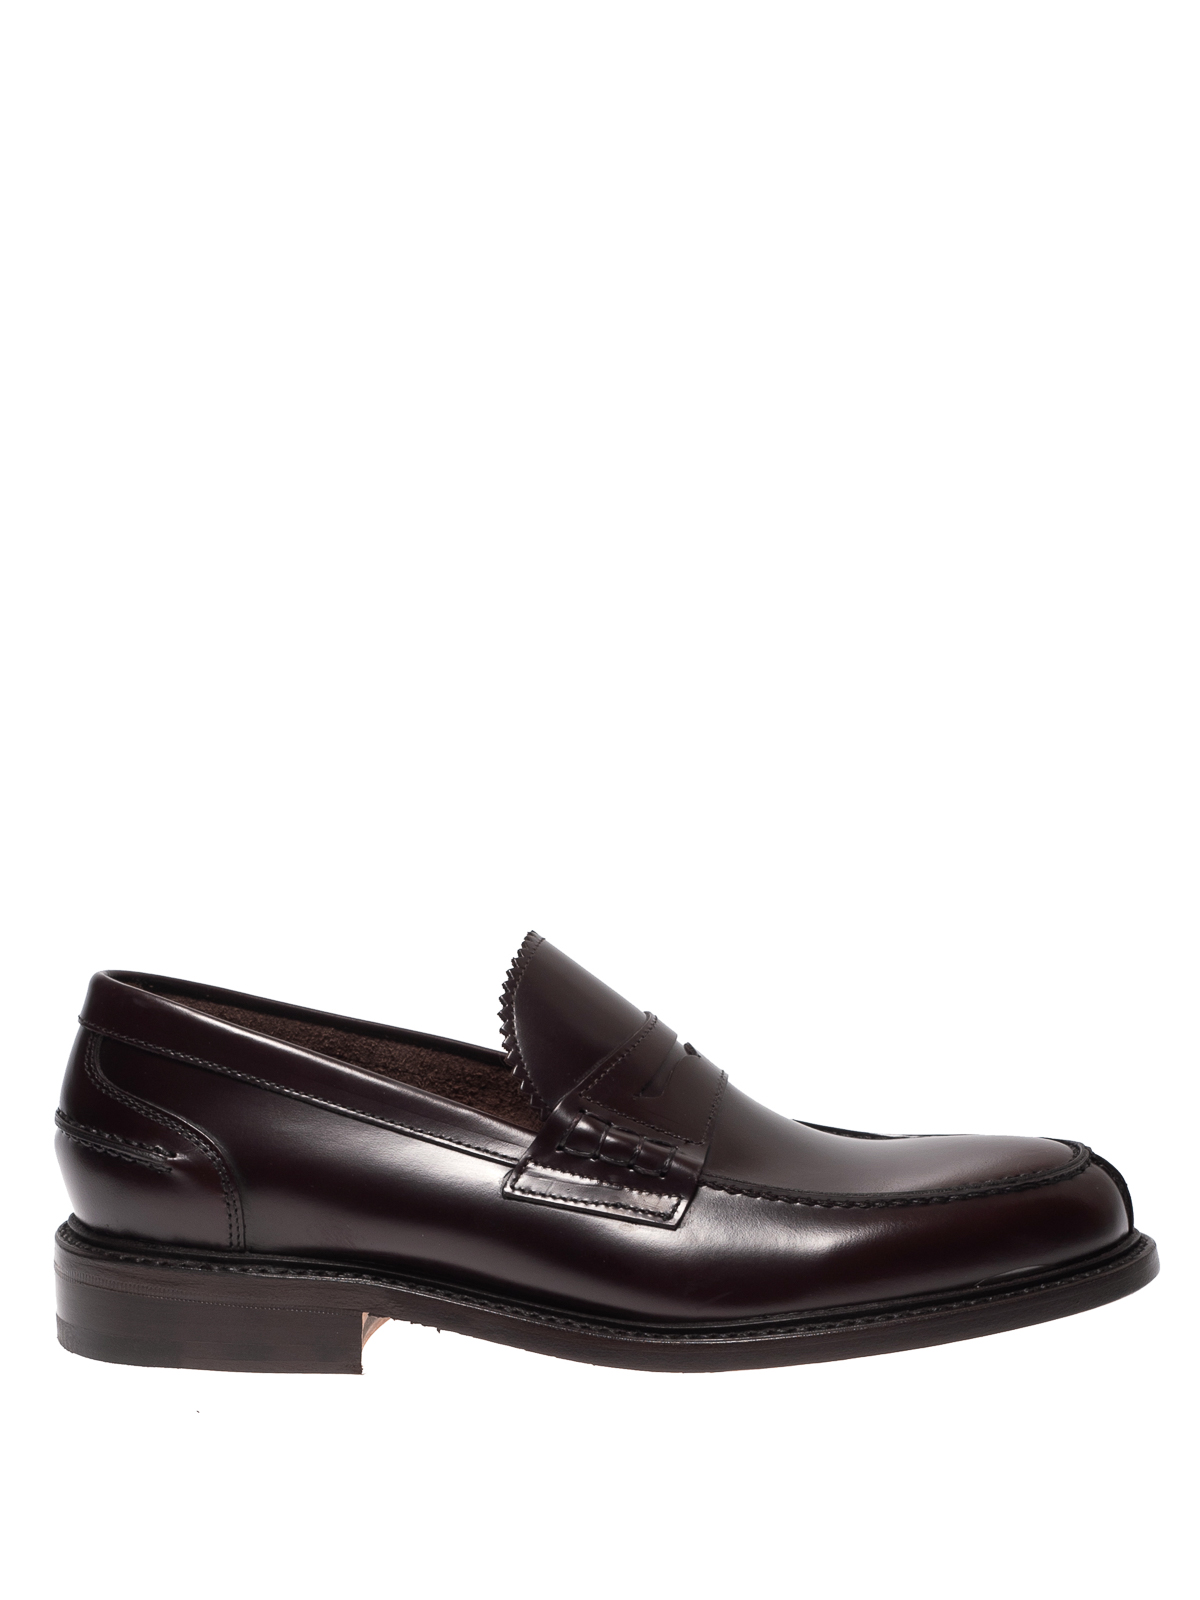 Berwick 1707 - Dark brown leather loafers - Loafers & Slippers ...